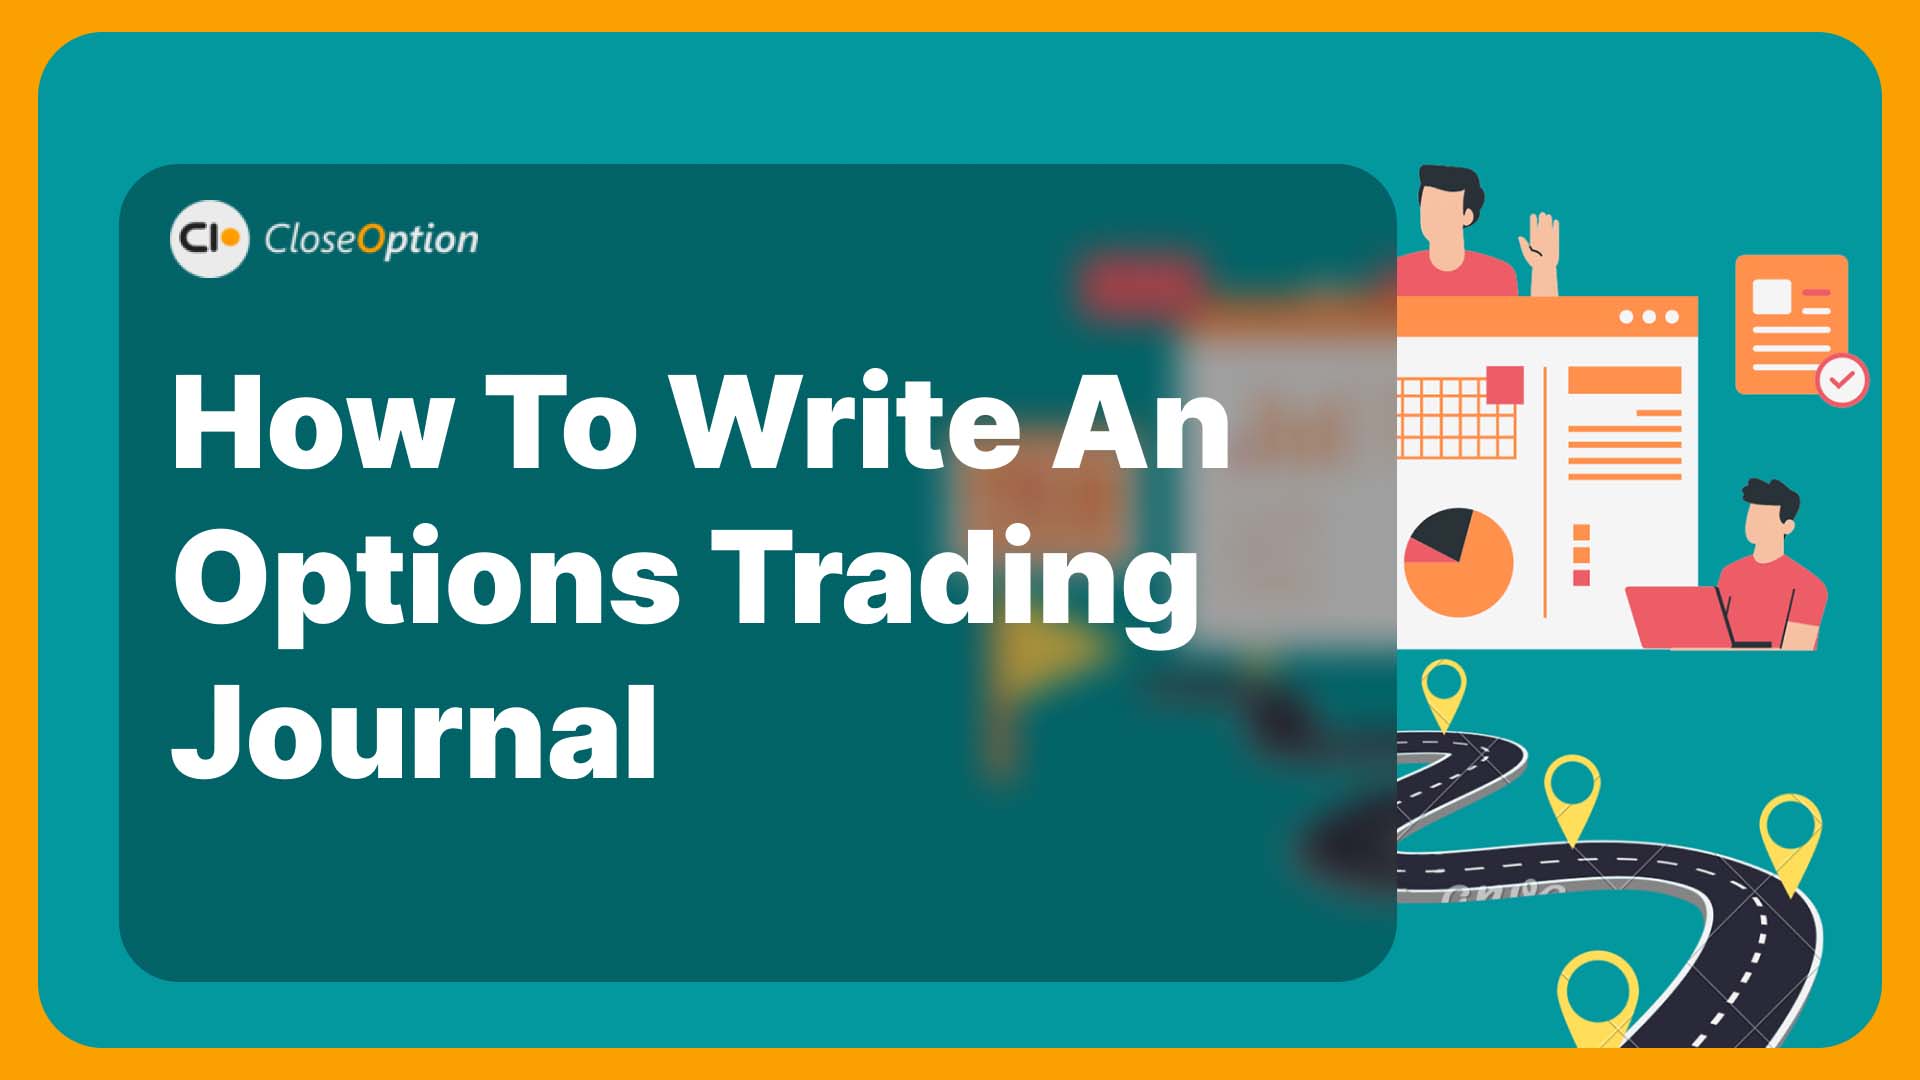 Options Trading Journal